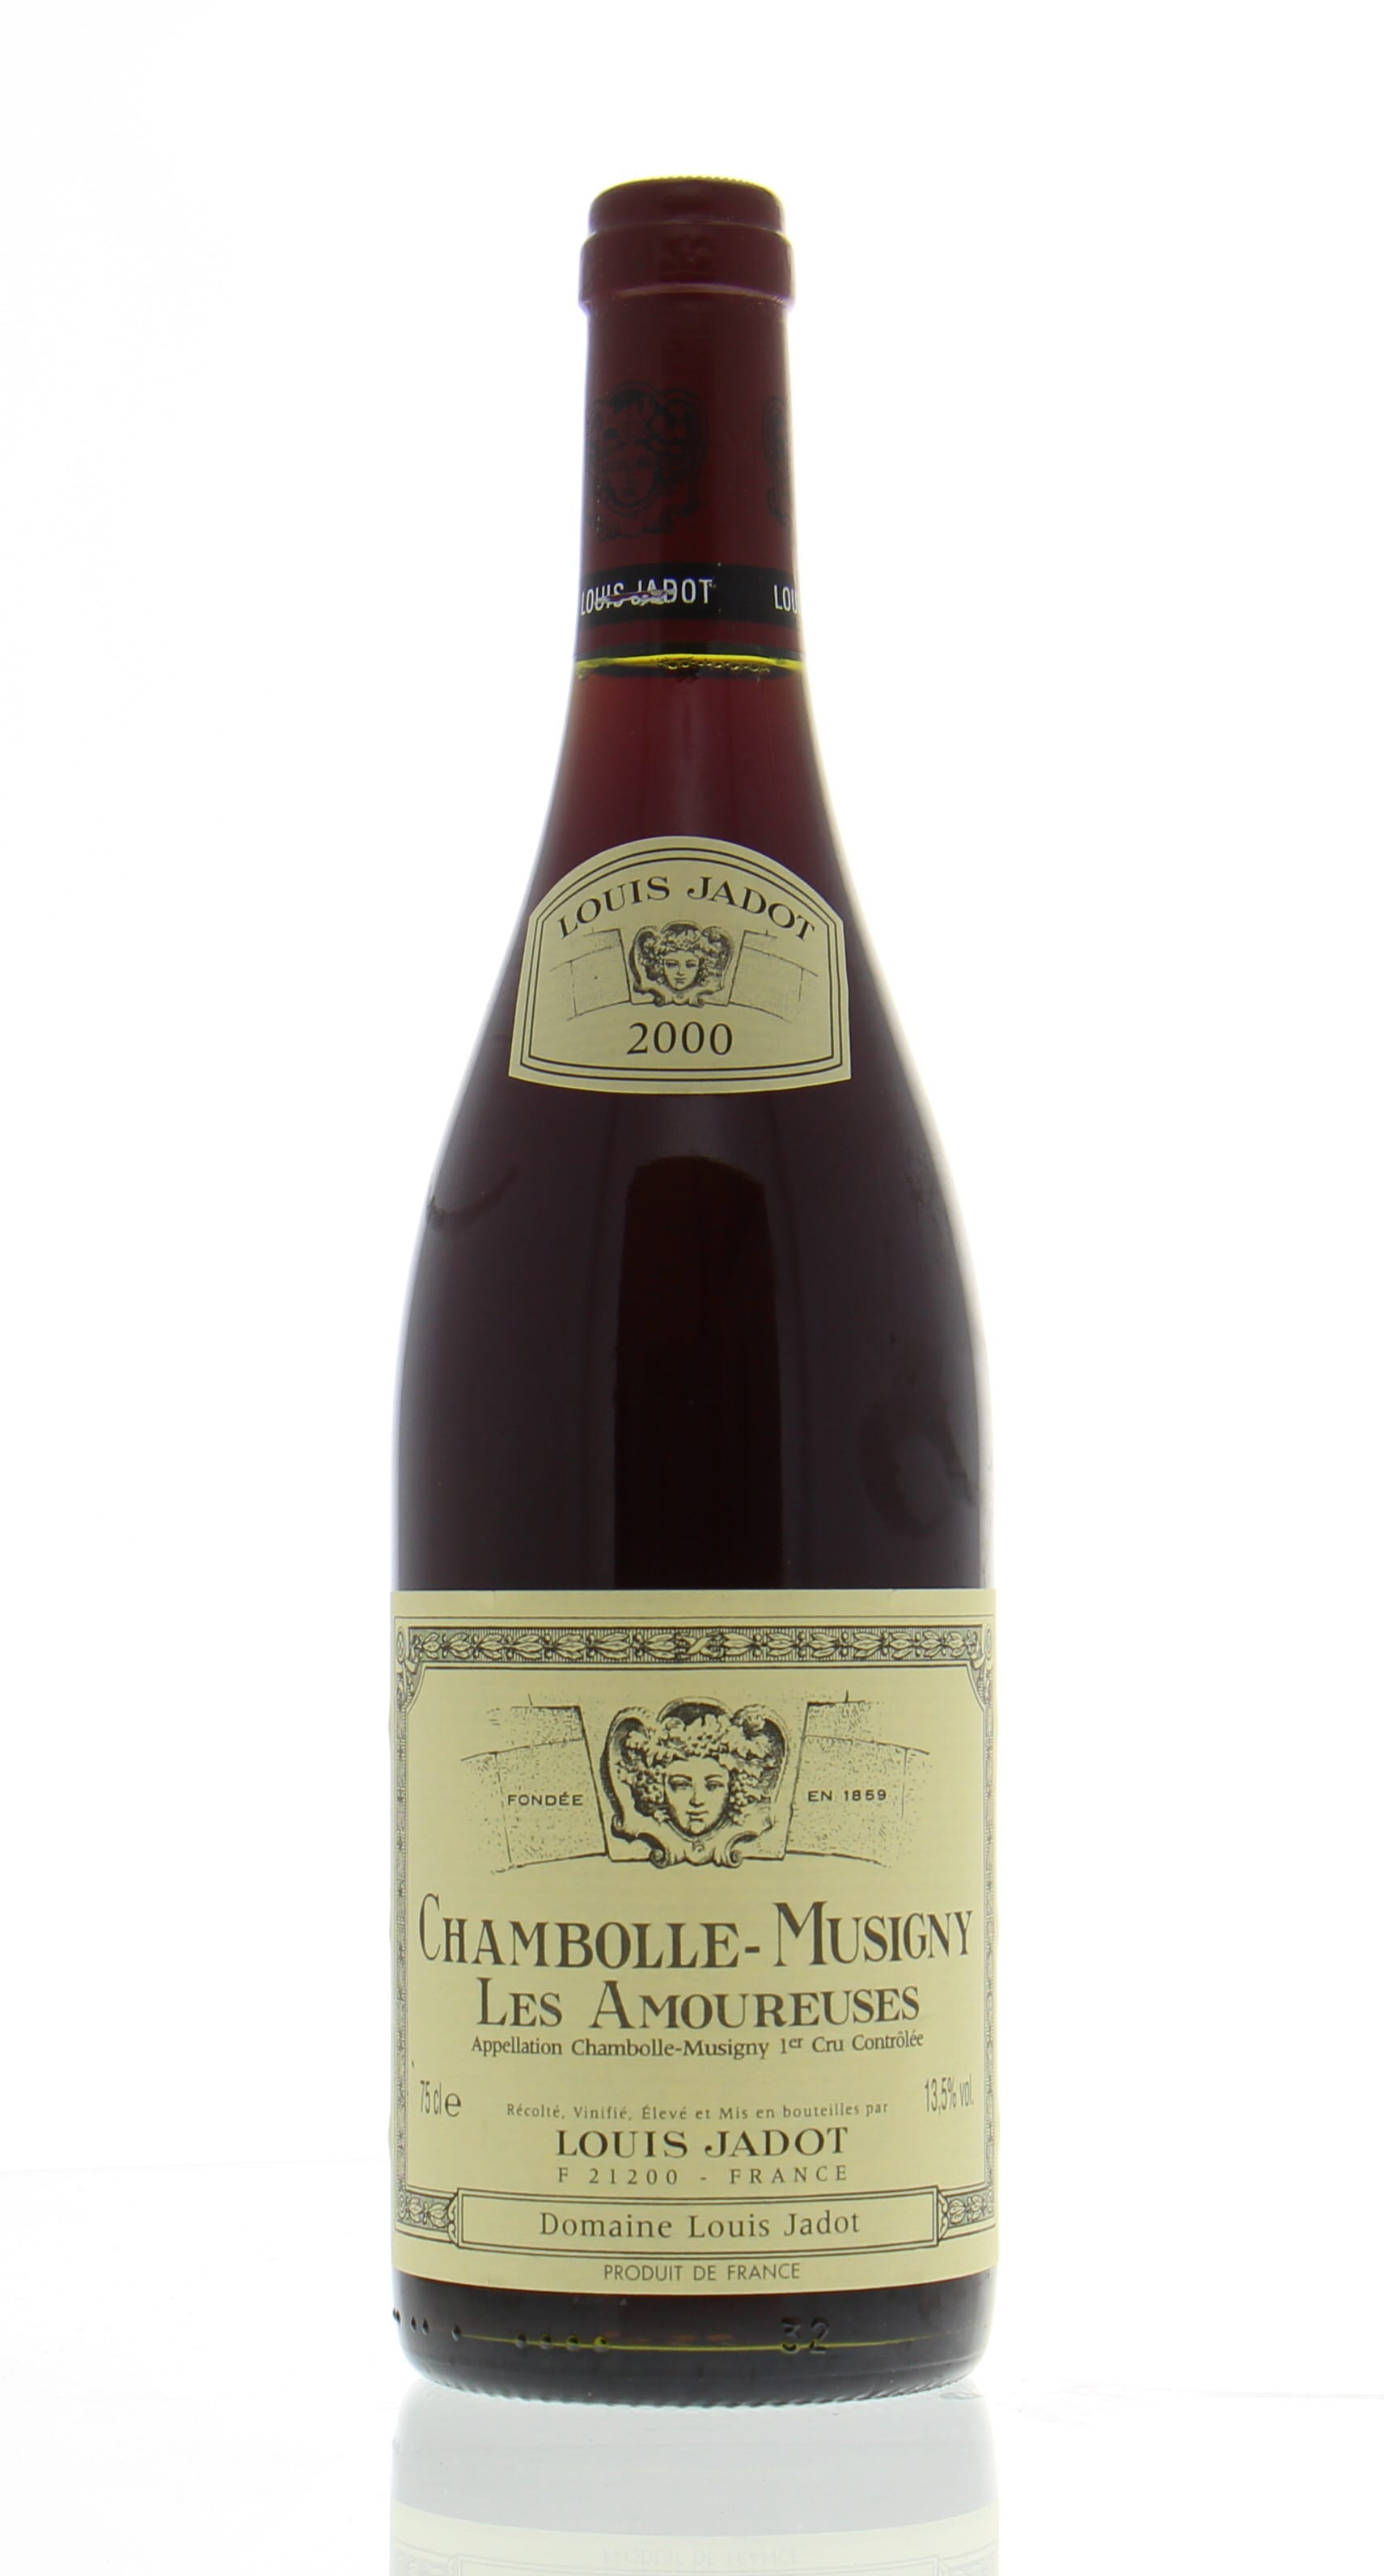 Jadot - Chambolle Musigny les Amoureuses 2000 Perfect